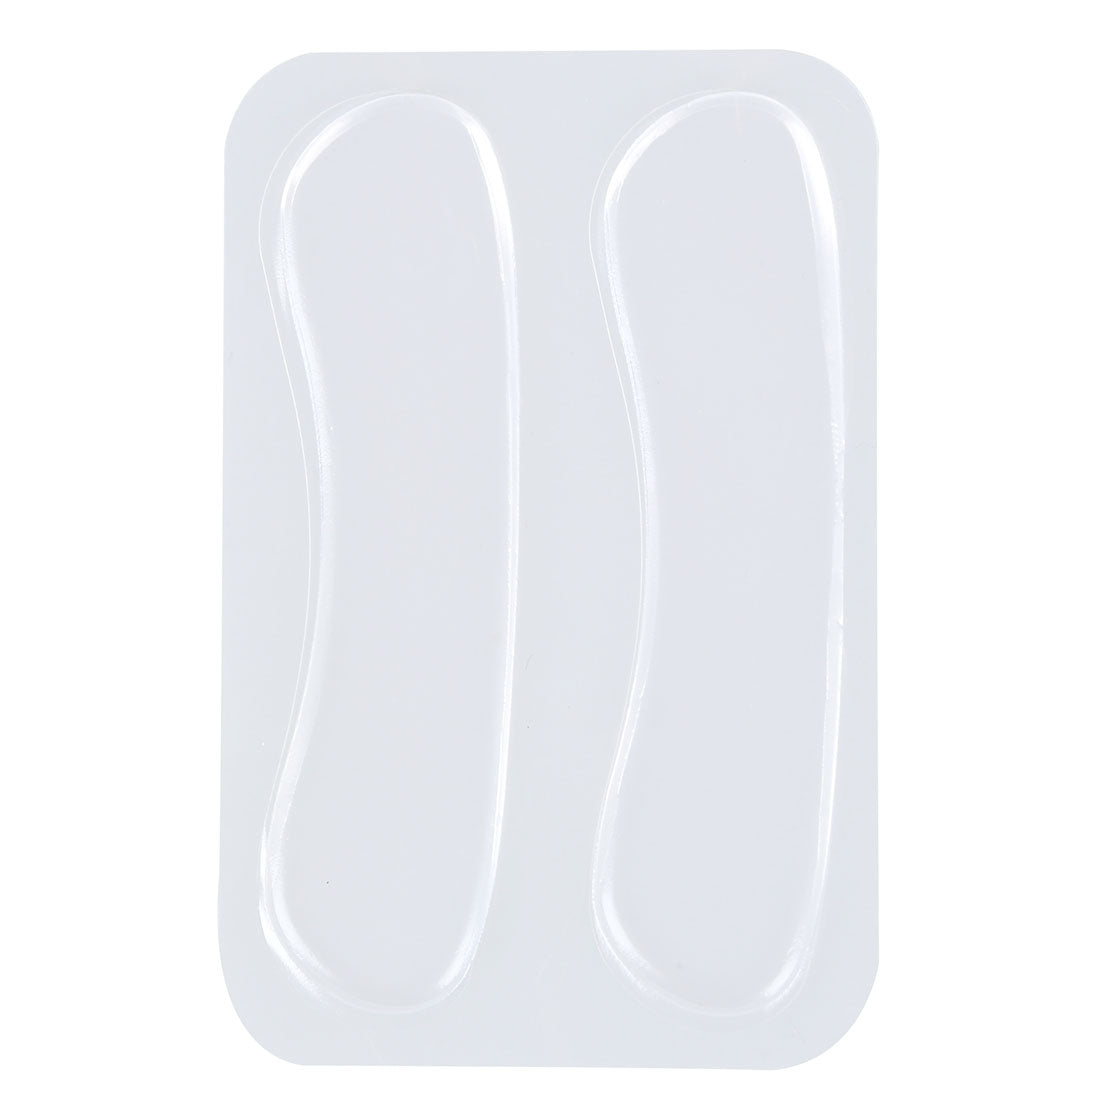 Hot-Silicone Protector Foot Feet Care Shoe Insert Pad Insole - ebowsos